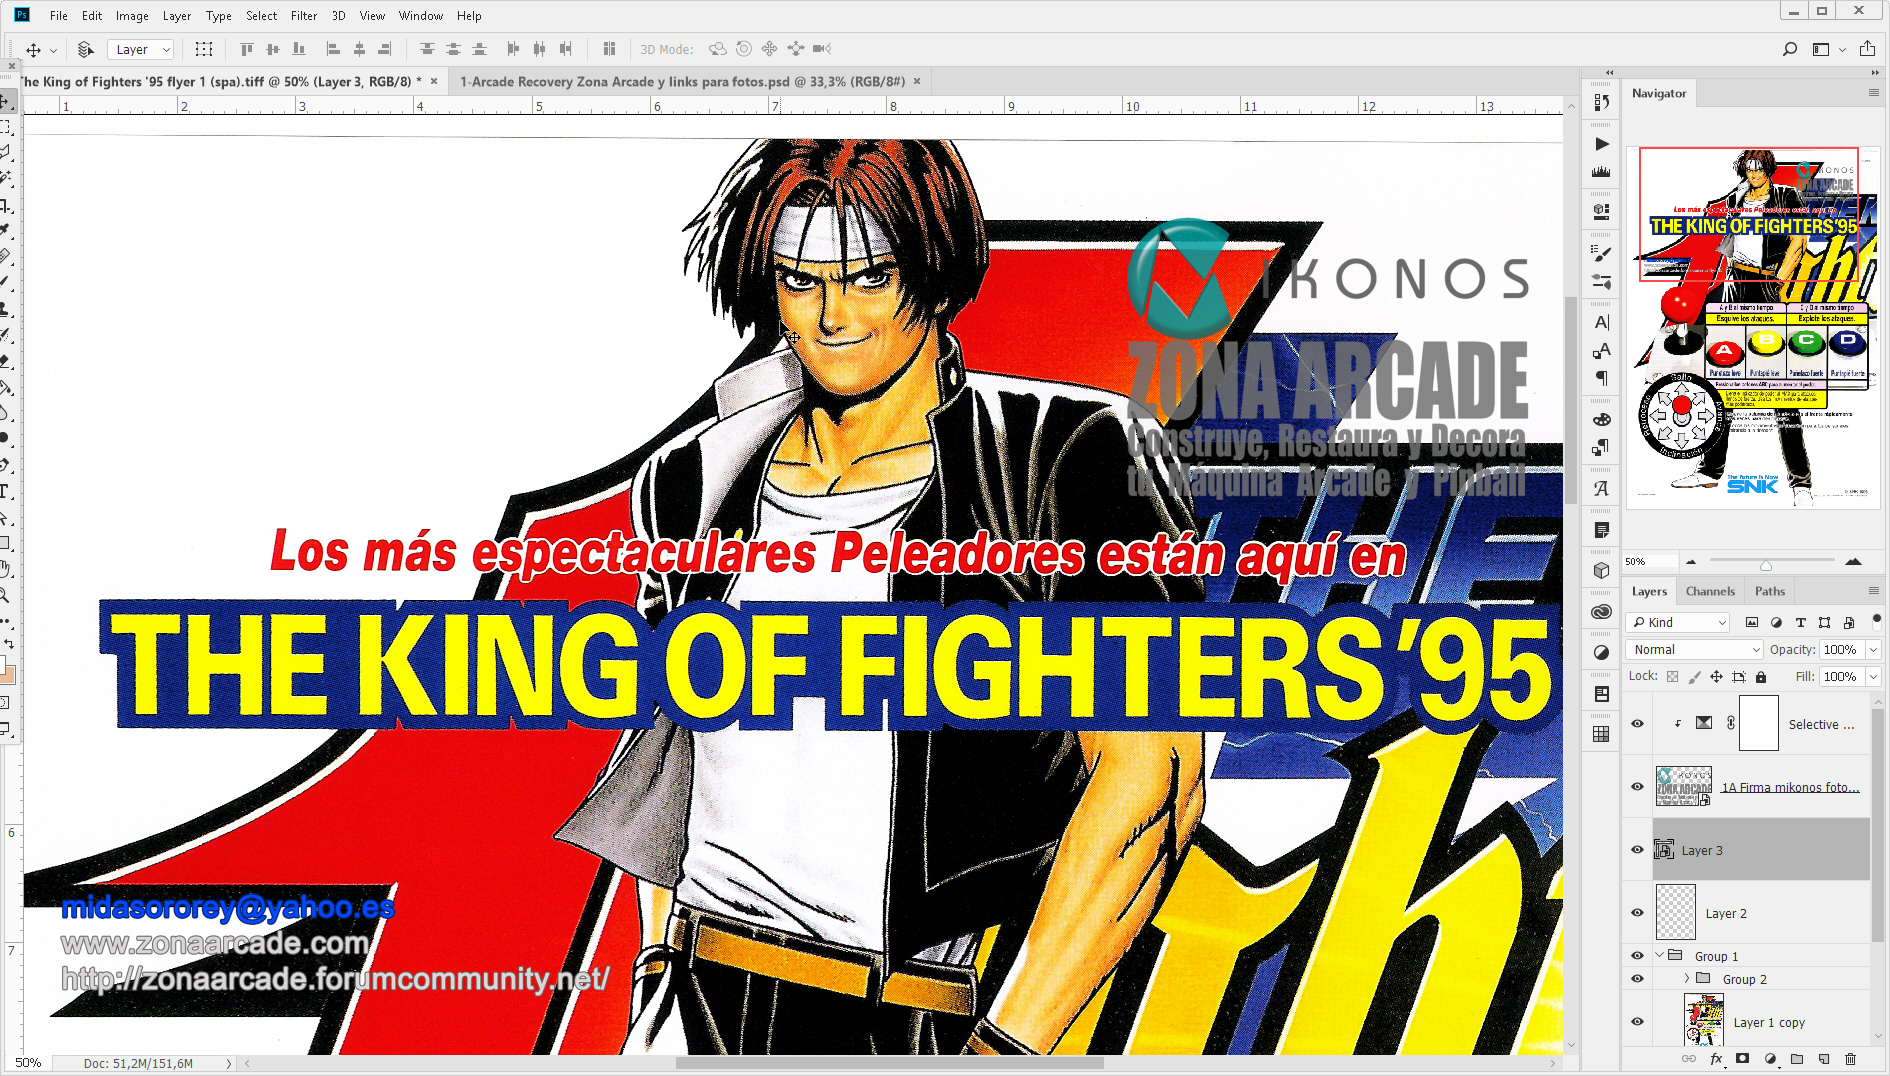 The-King-Of-Fighters-95-Flyer-1-sp-ver-Restored-Mikonos3